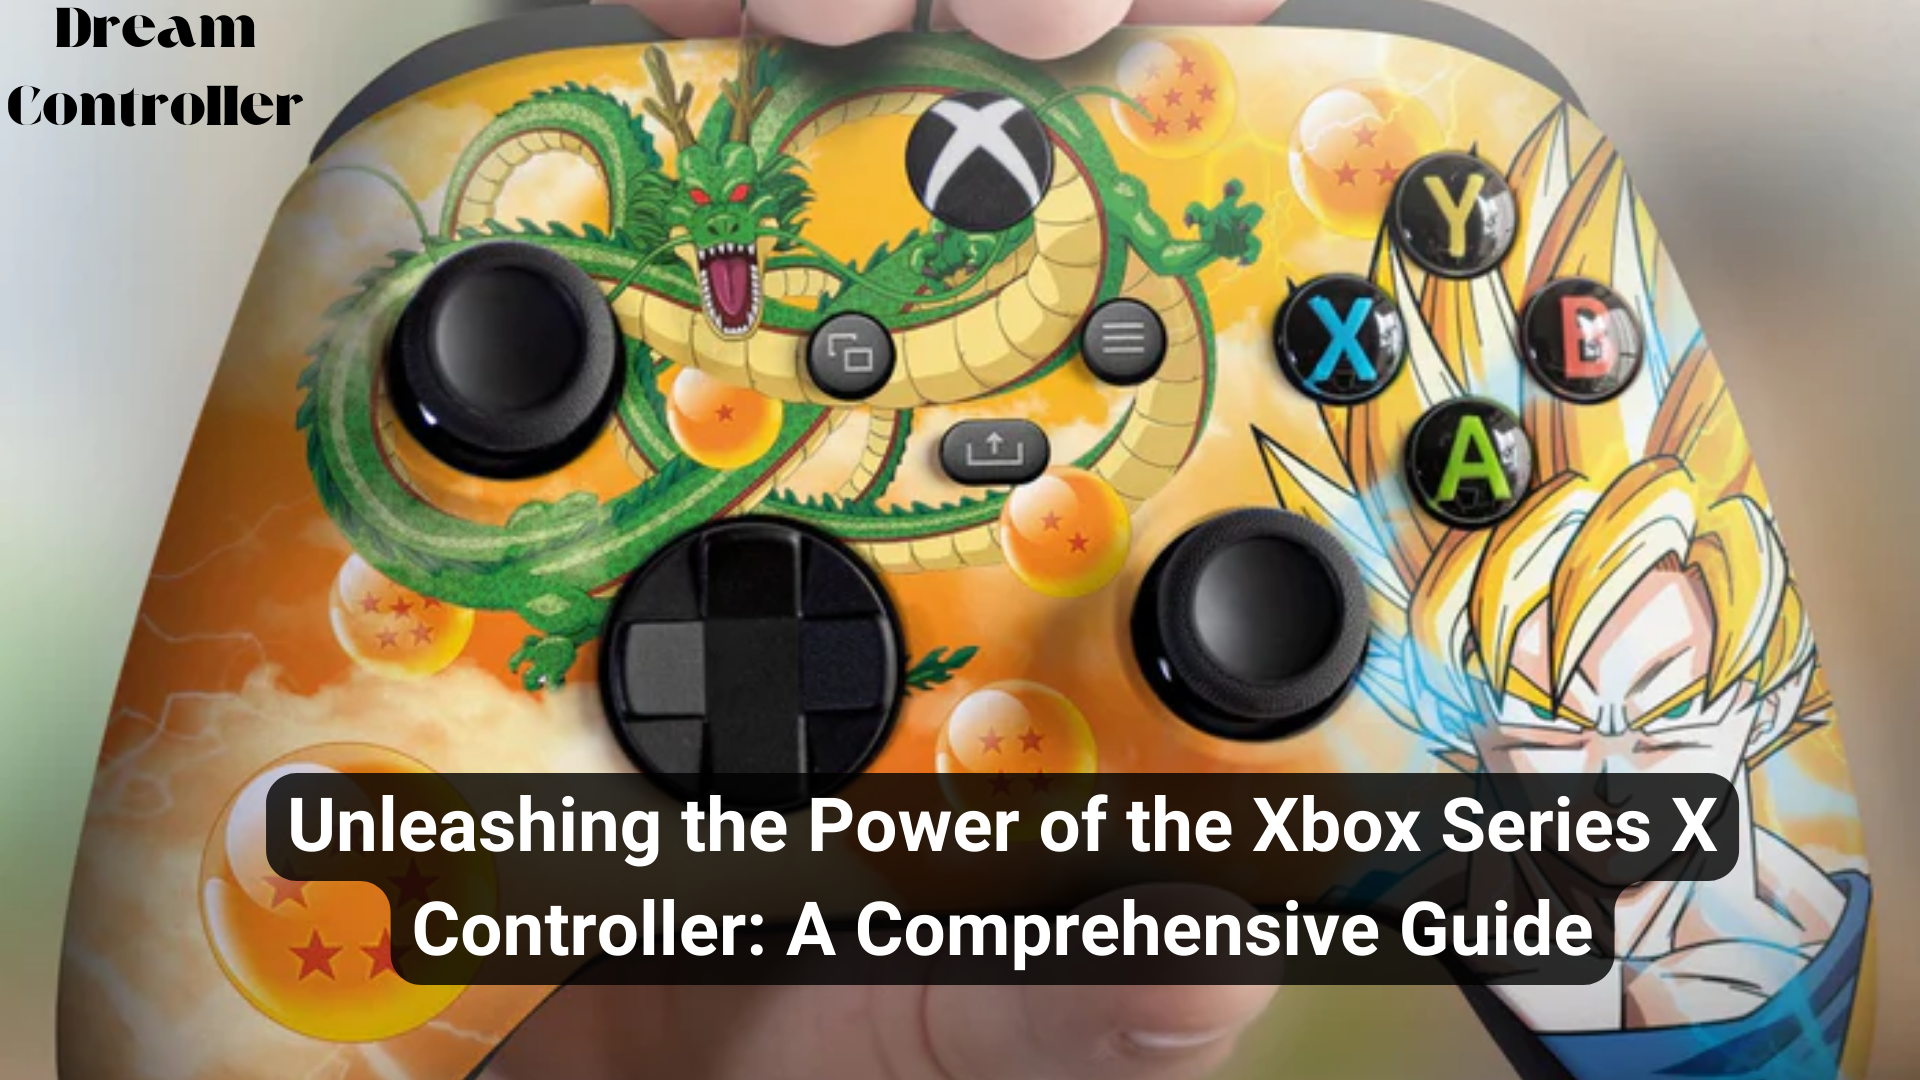 Unleashing the Power of the Xbox Series X Controller: A Comprehensive Guide